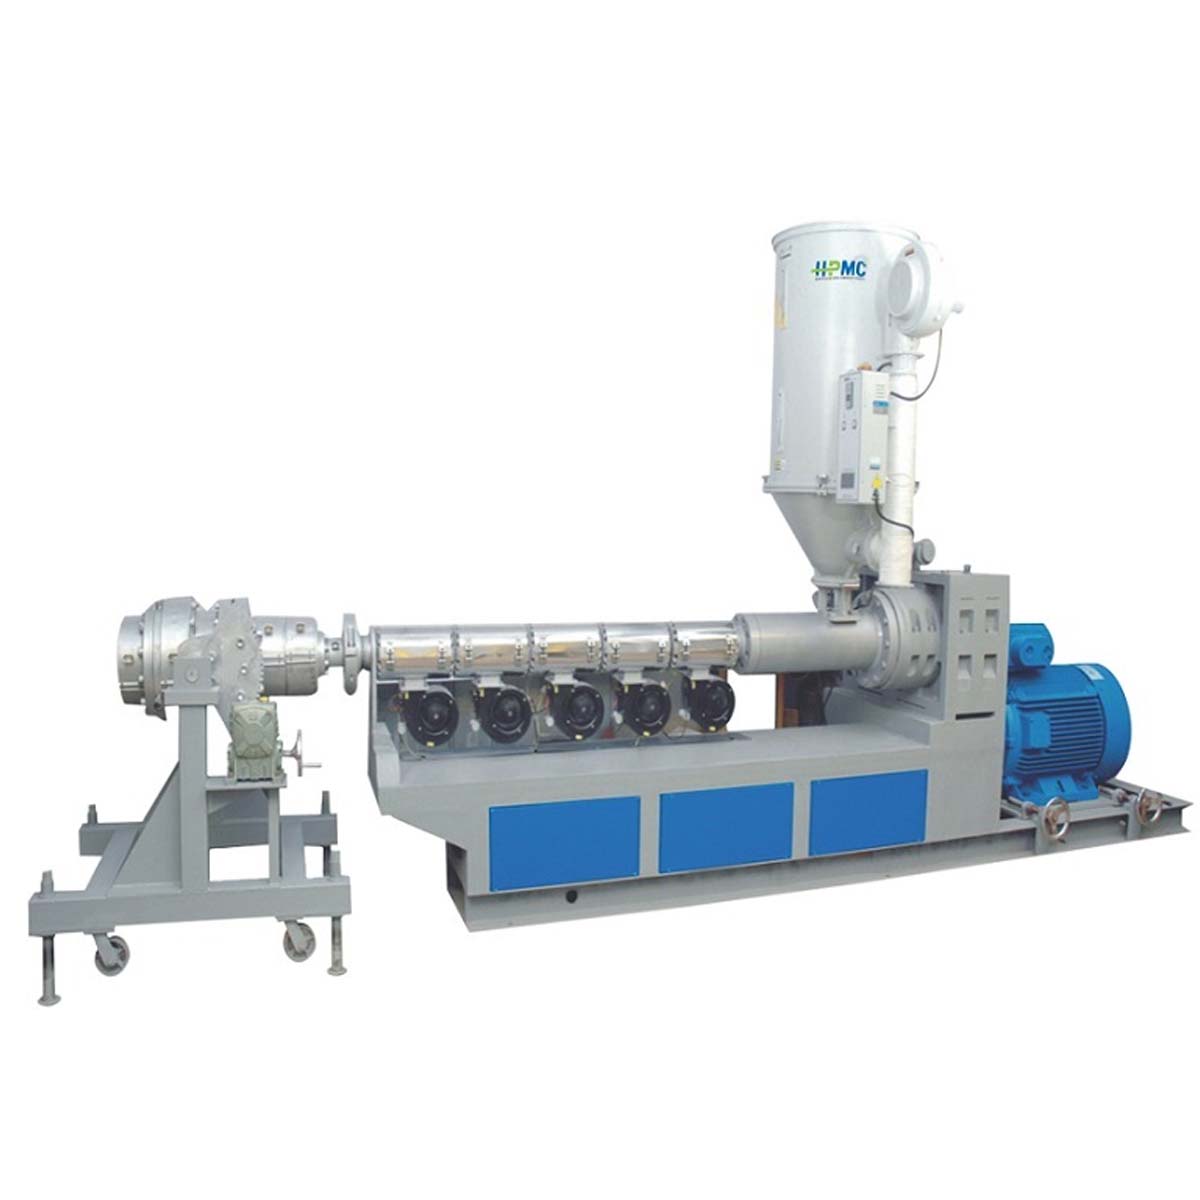 HDPE Pipe Machine Manufacturers, Suppliers and Exporters in Delhi